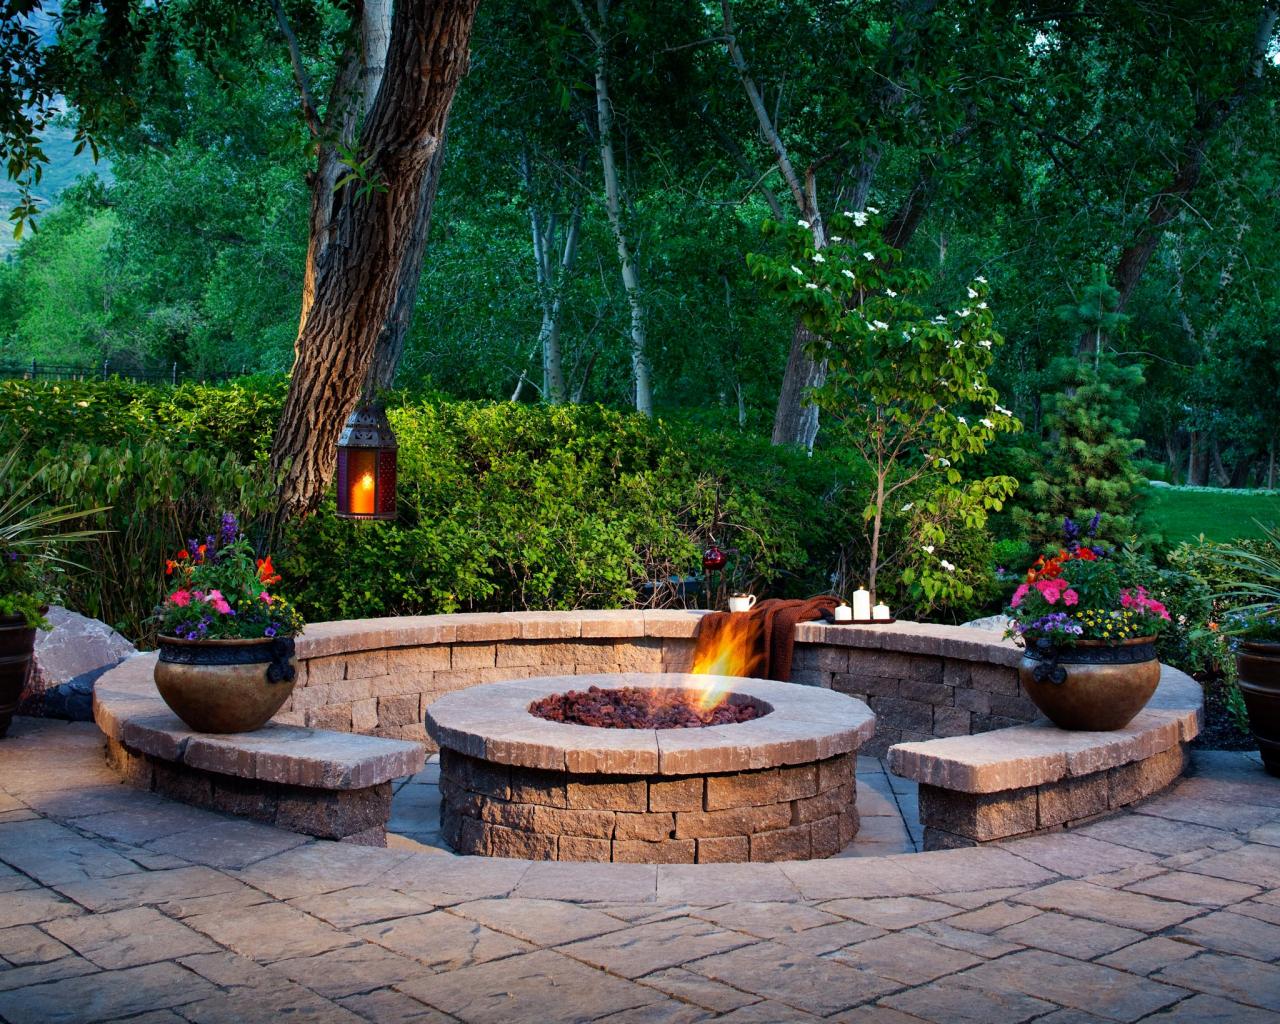 Designing A Patio Around Fire Pit Diy, Small Fire Pit For Porch